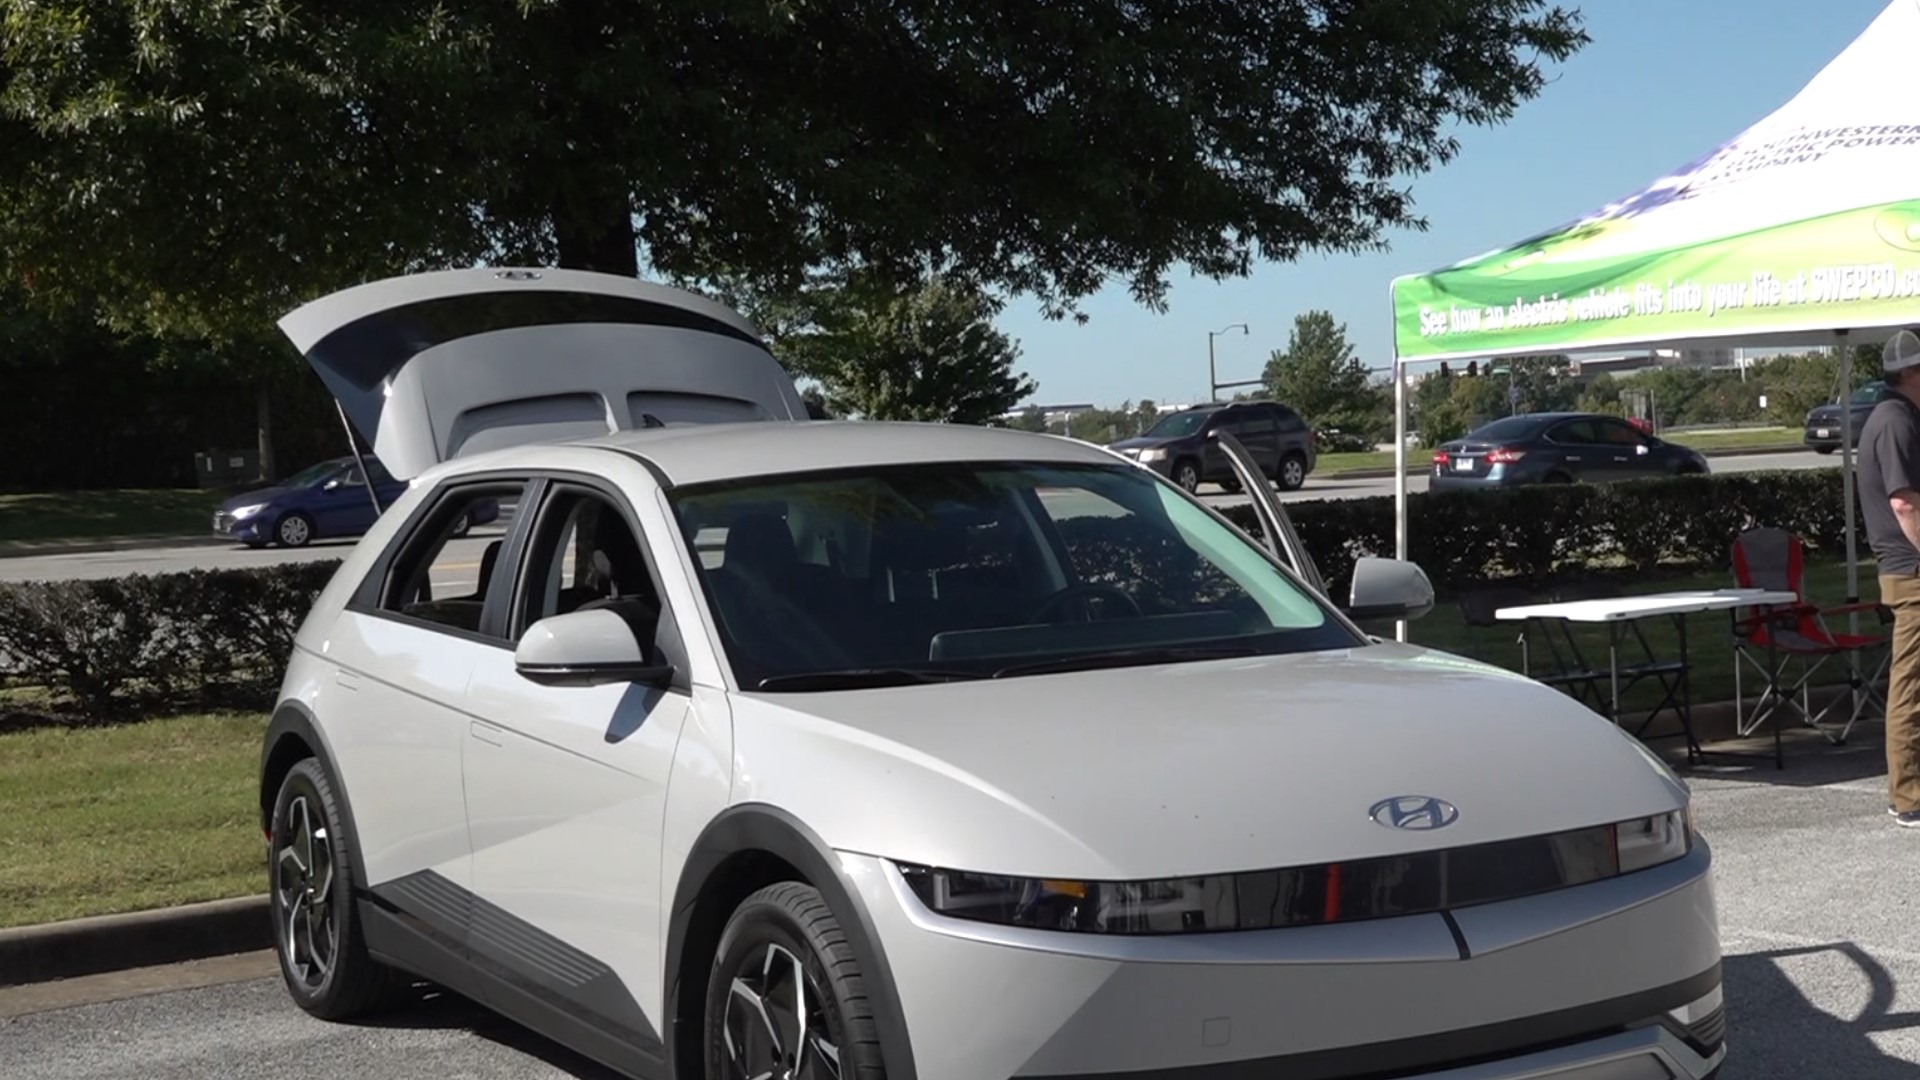 Drive Electric NWA was held on Saturday, Sept. 30, 2023 to educate people on their importance.